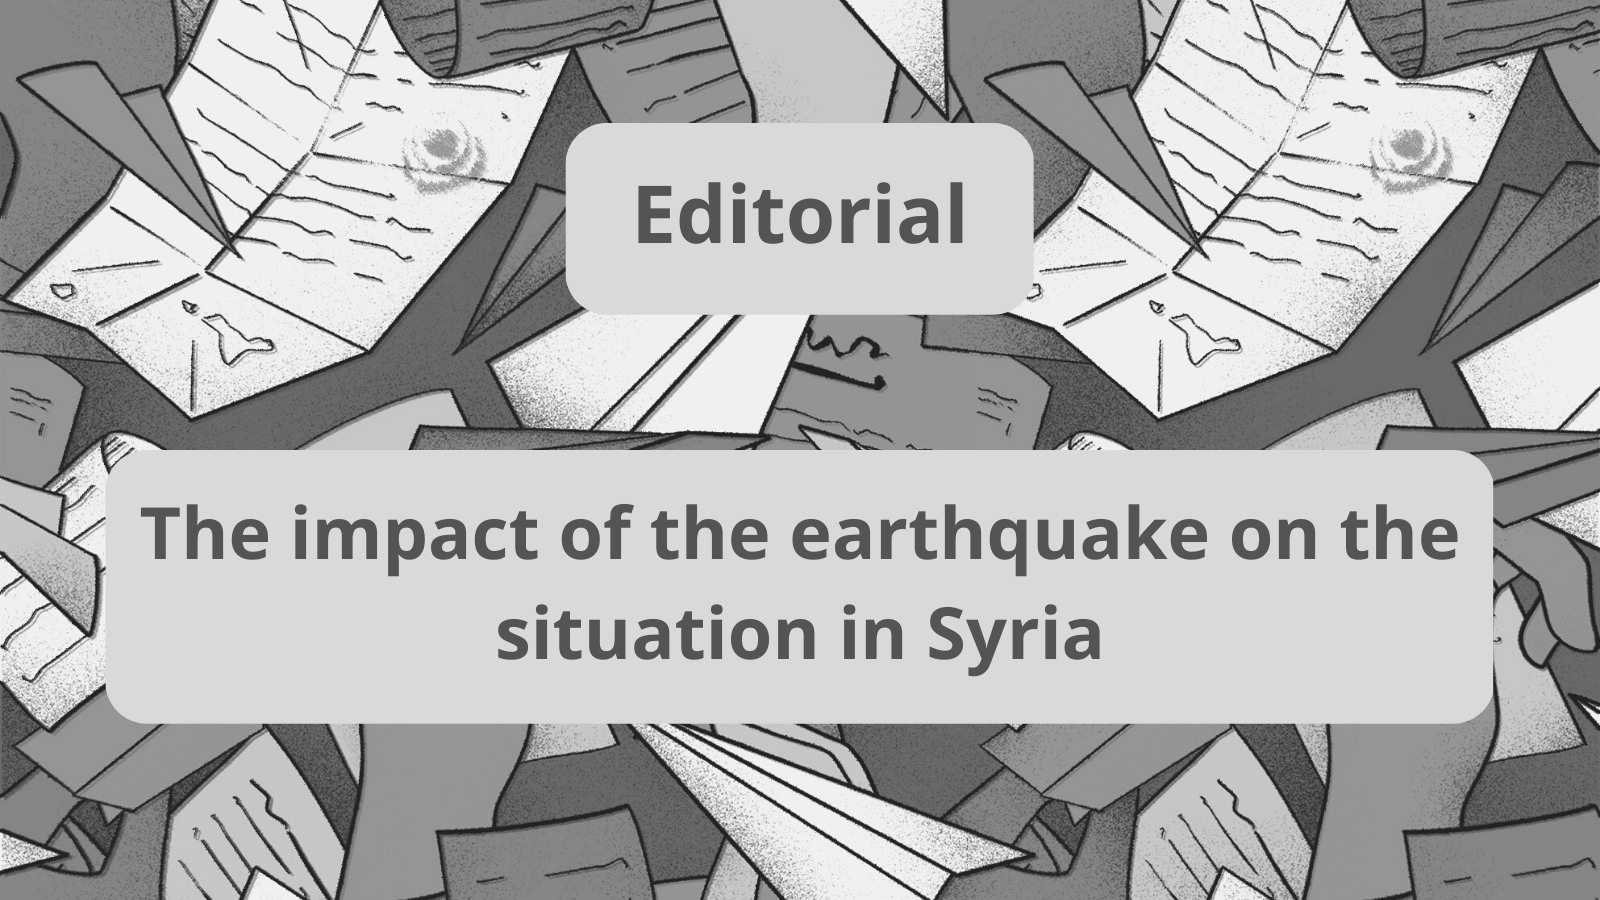 The impact of the earthquake on the situation in Syria